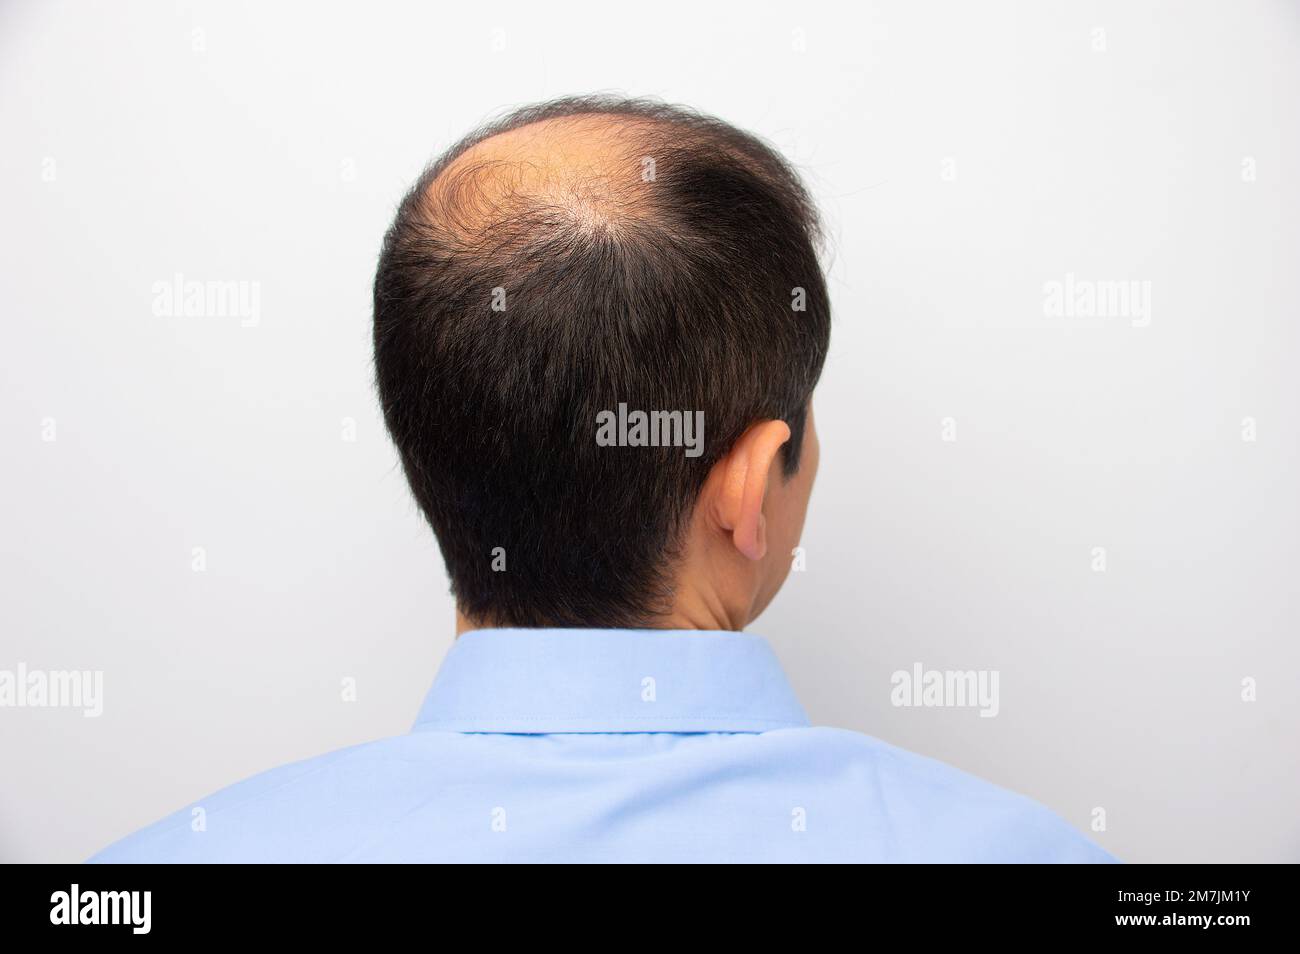 Rear view of a male head with thinning hair or alopecia with white background Stock Photo